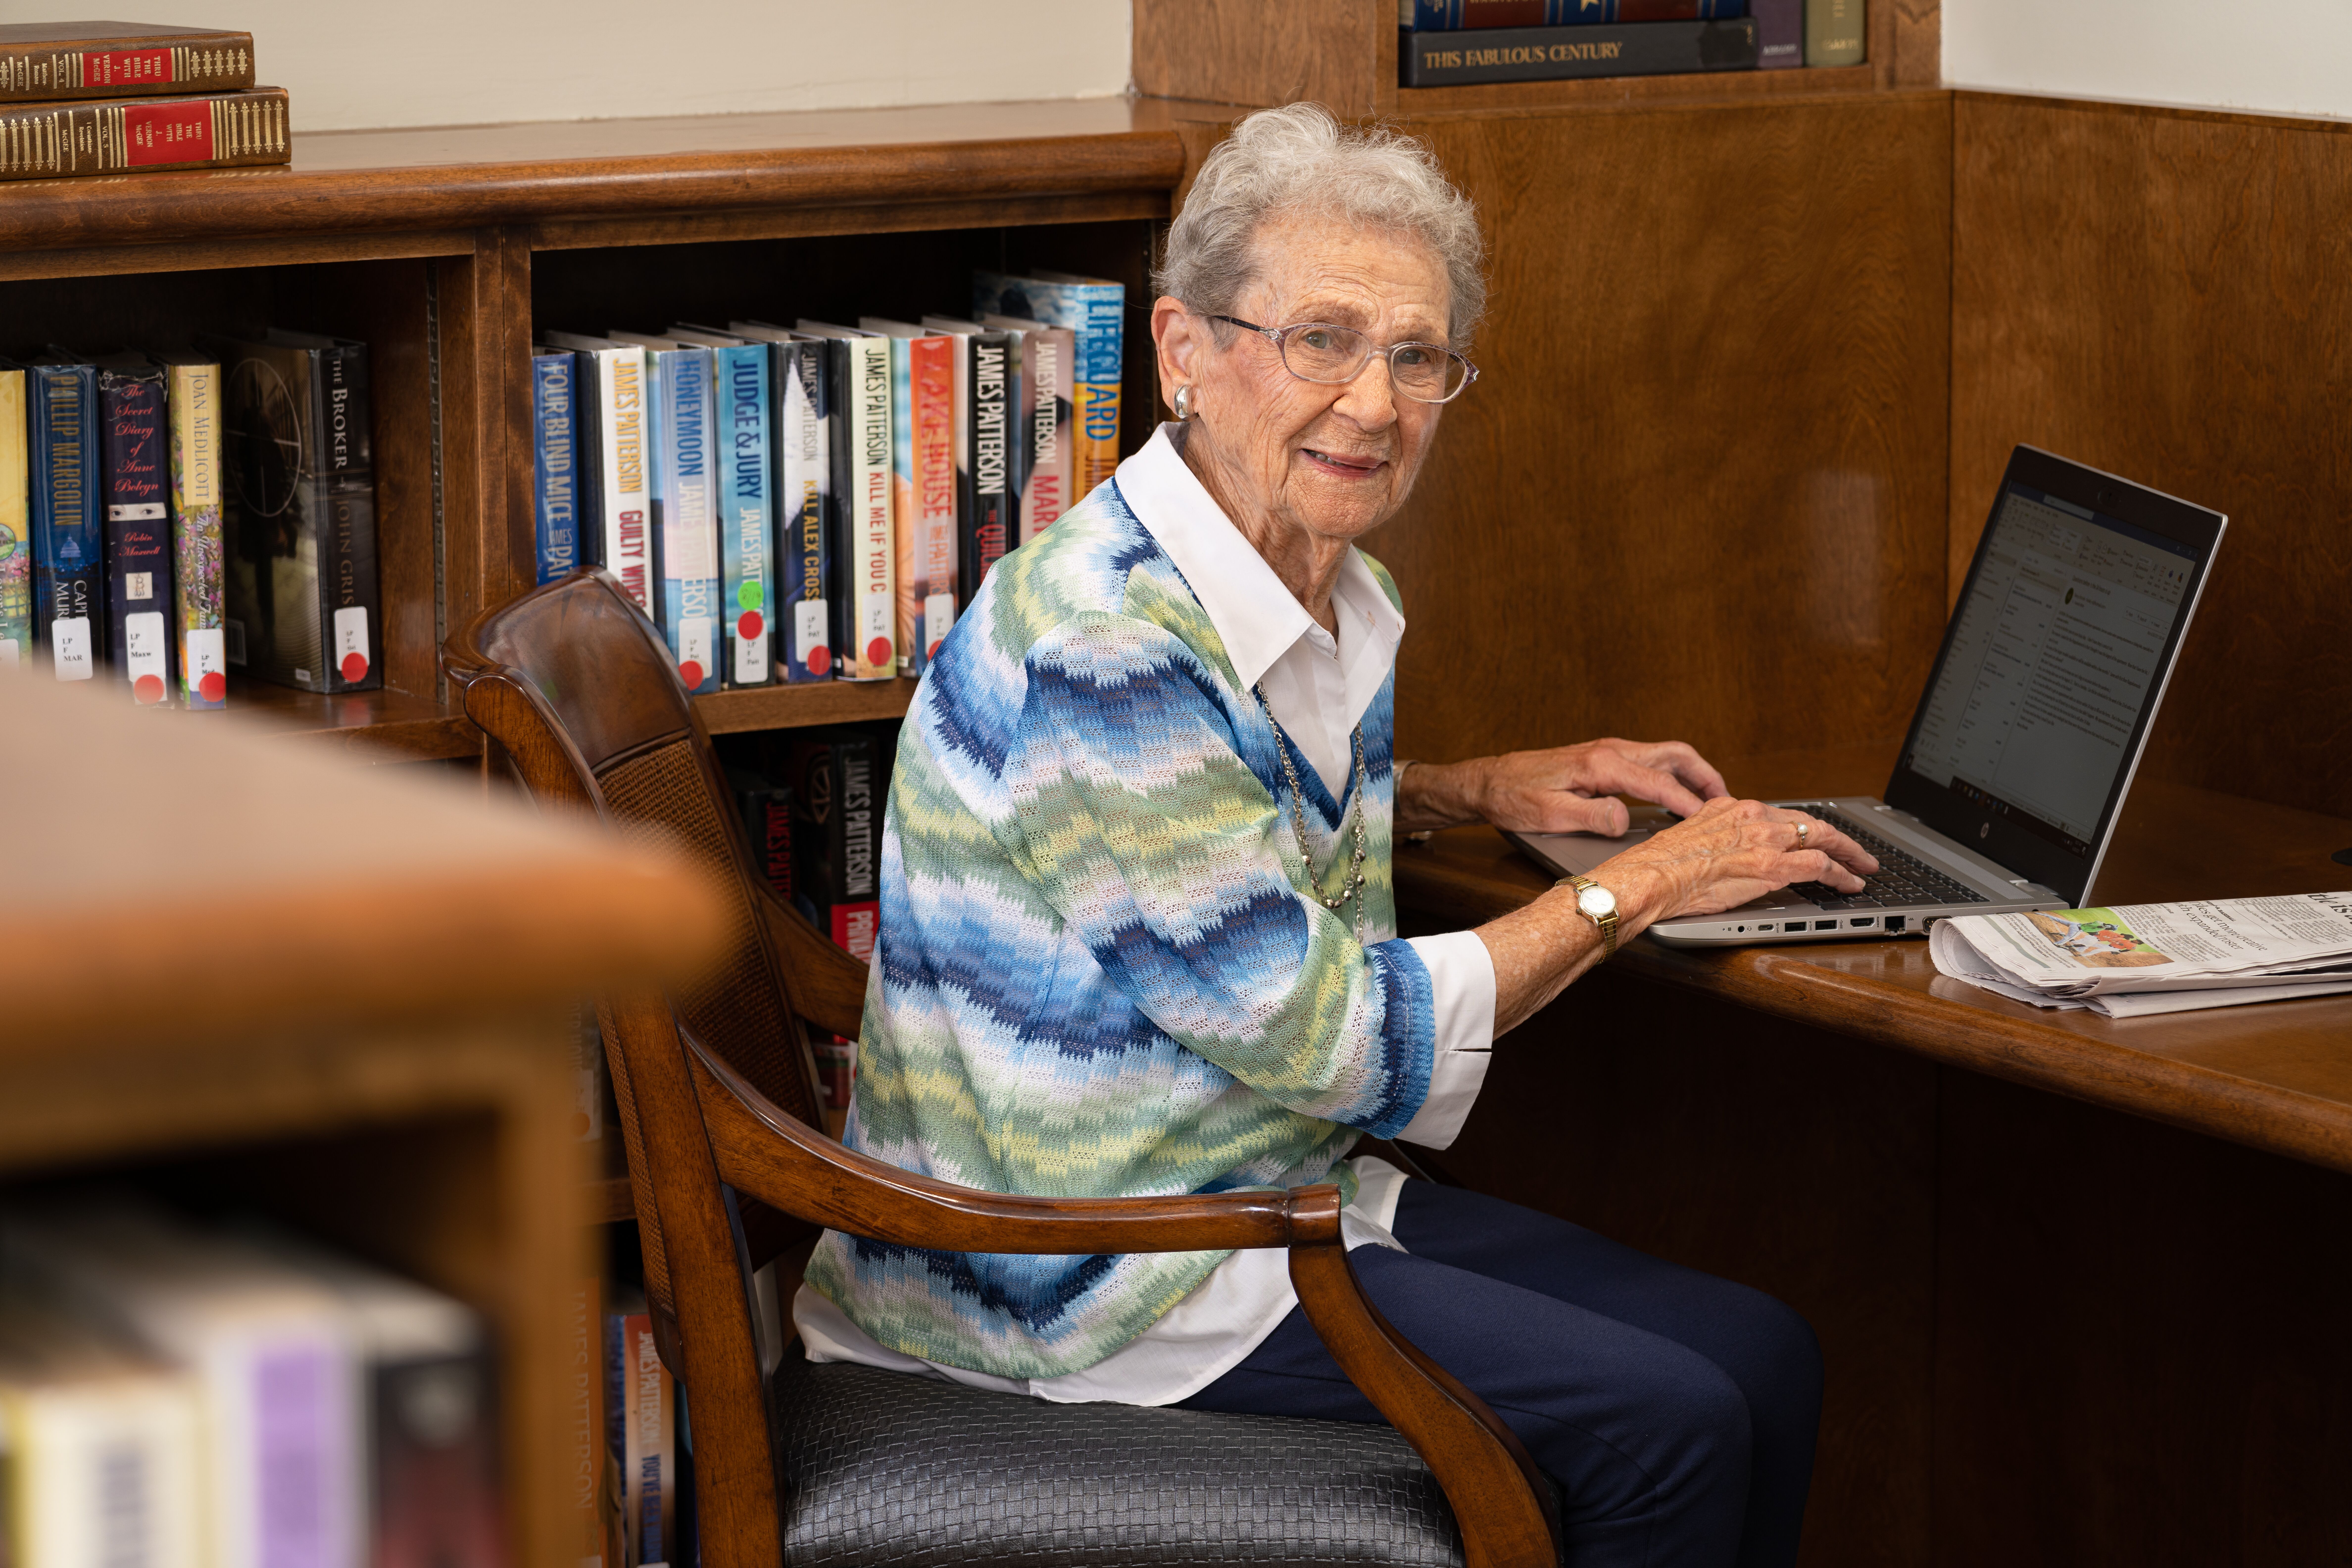 senior resident at The Chespeake on laptop in the library area